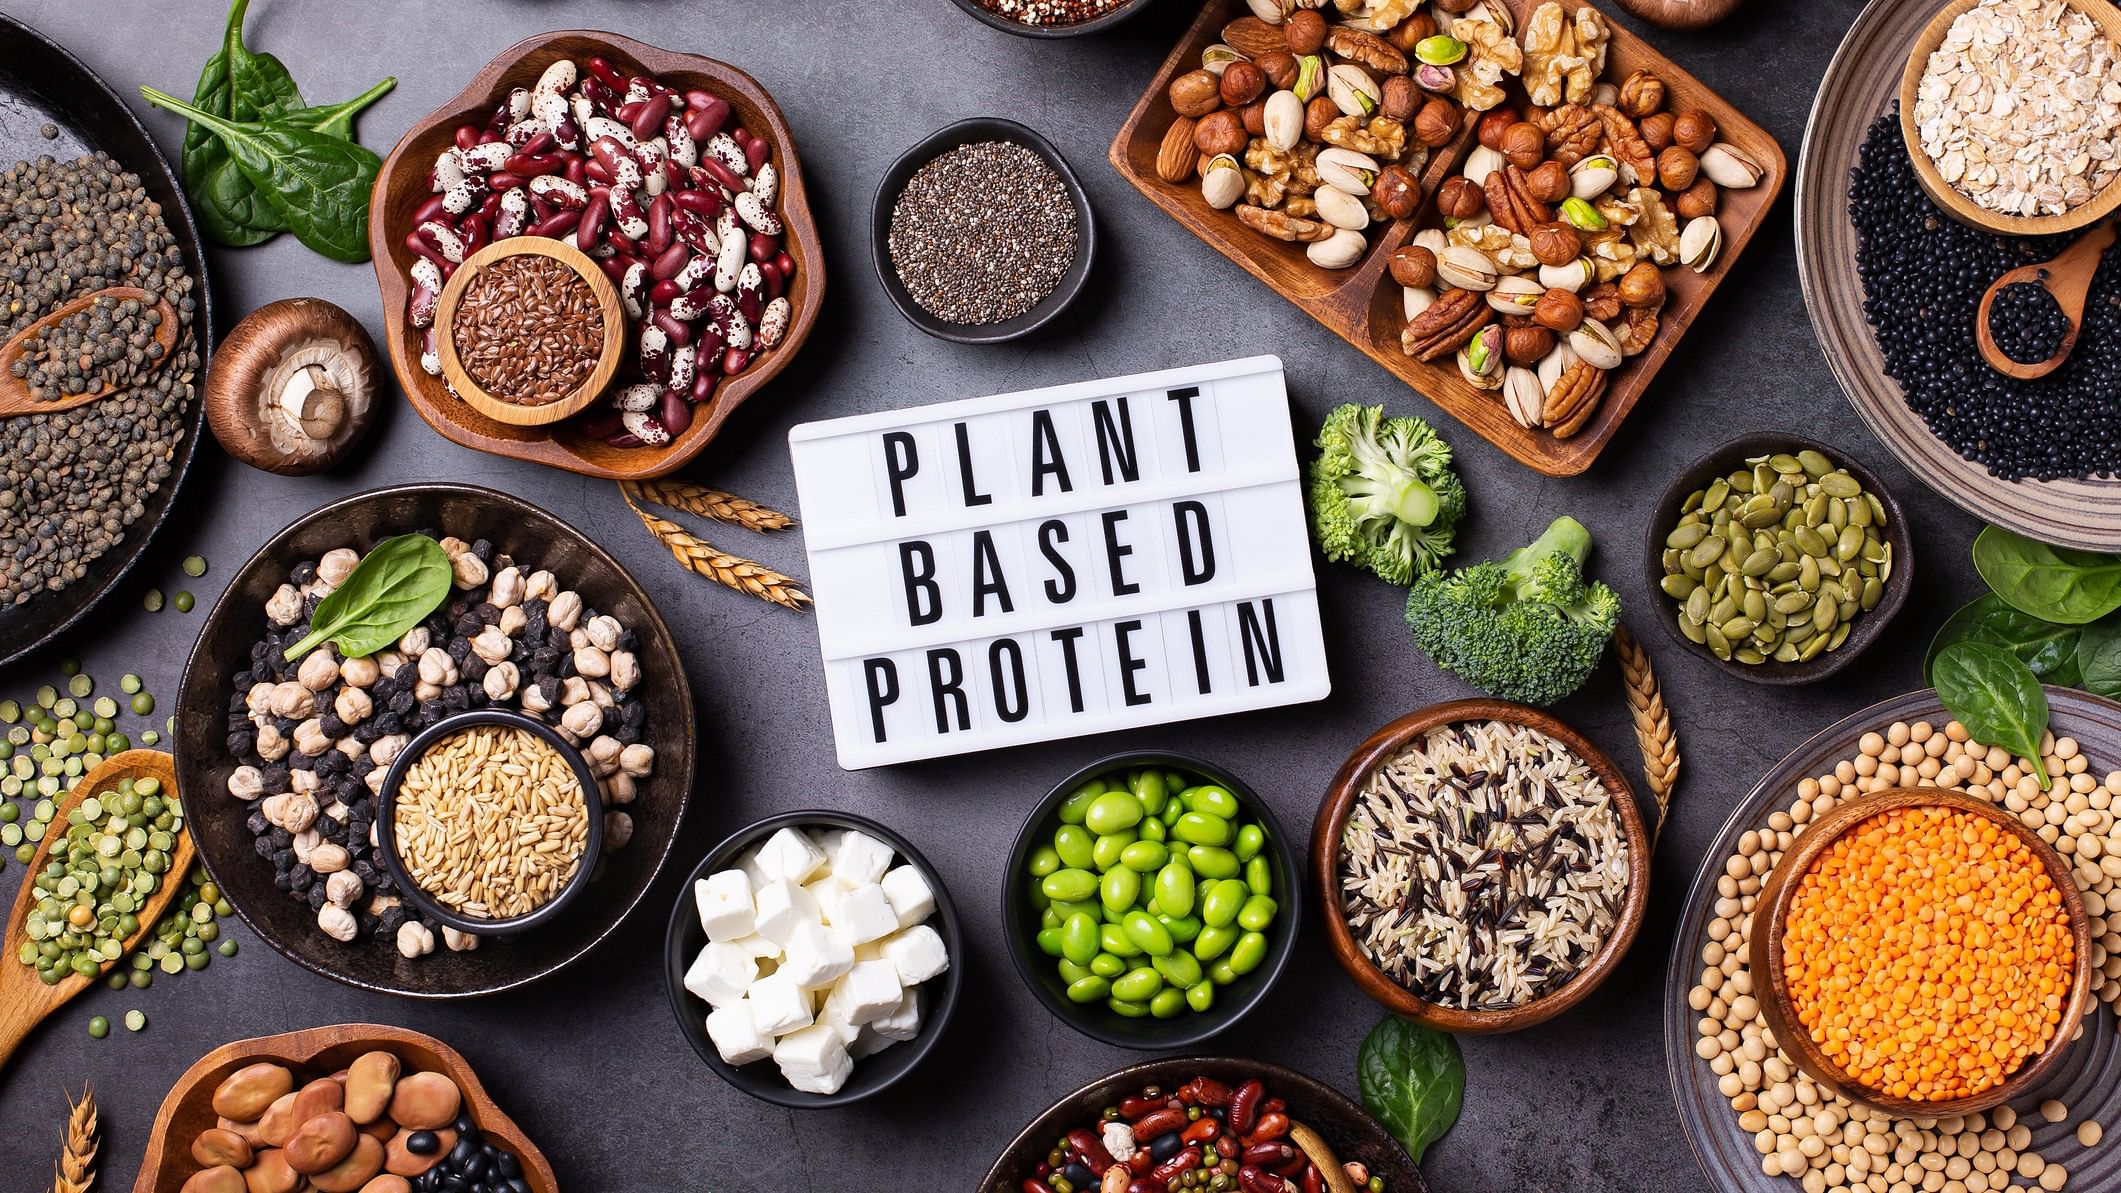 <div class="paragraphs"><p>Representative image showing foods containing plant-based protein.</p></div>